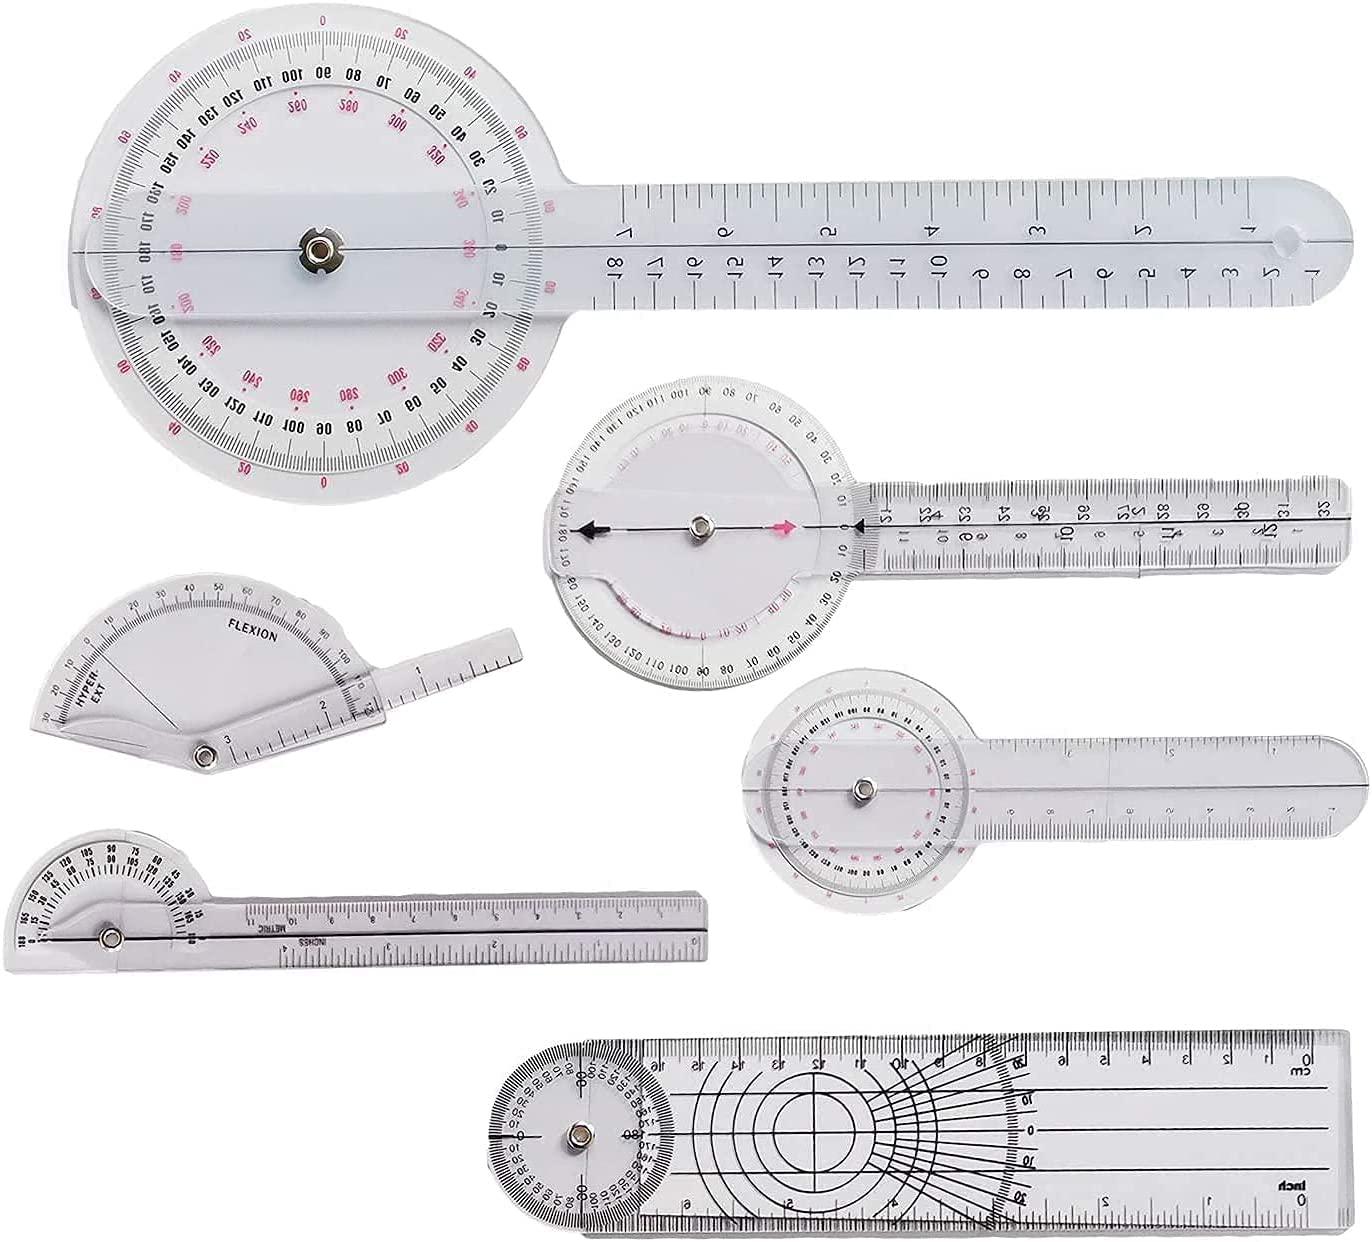 LBHMEI-, LBHMEI 6 Pcs Finger Goniometer, 6 8 12 Inch Angle Ruler Finger Goniometer, 360 Degree Goniometer Set Body Measuring Tape Goniometer Protractor Ruler